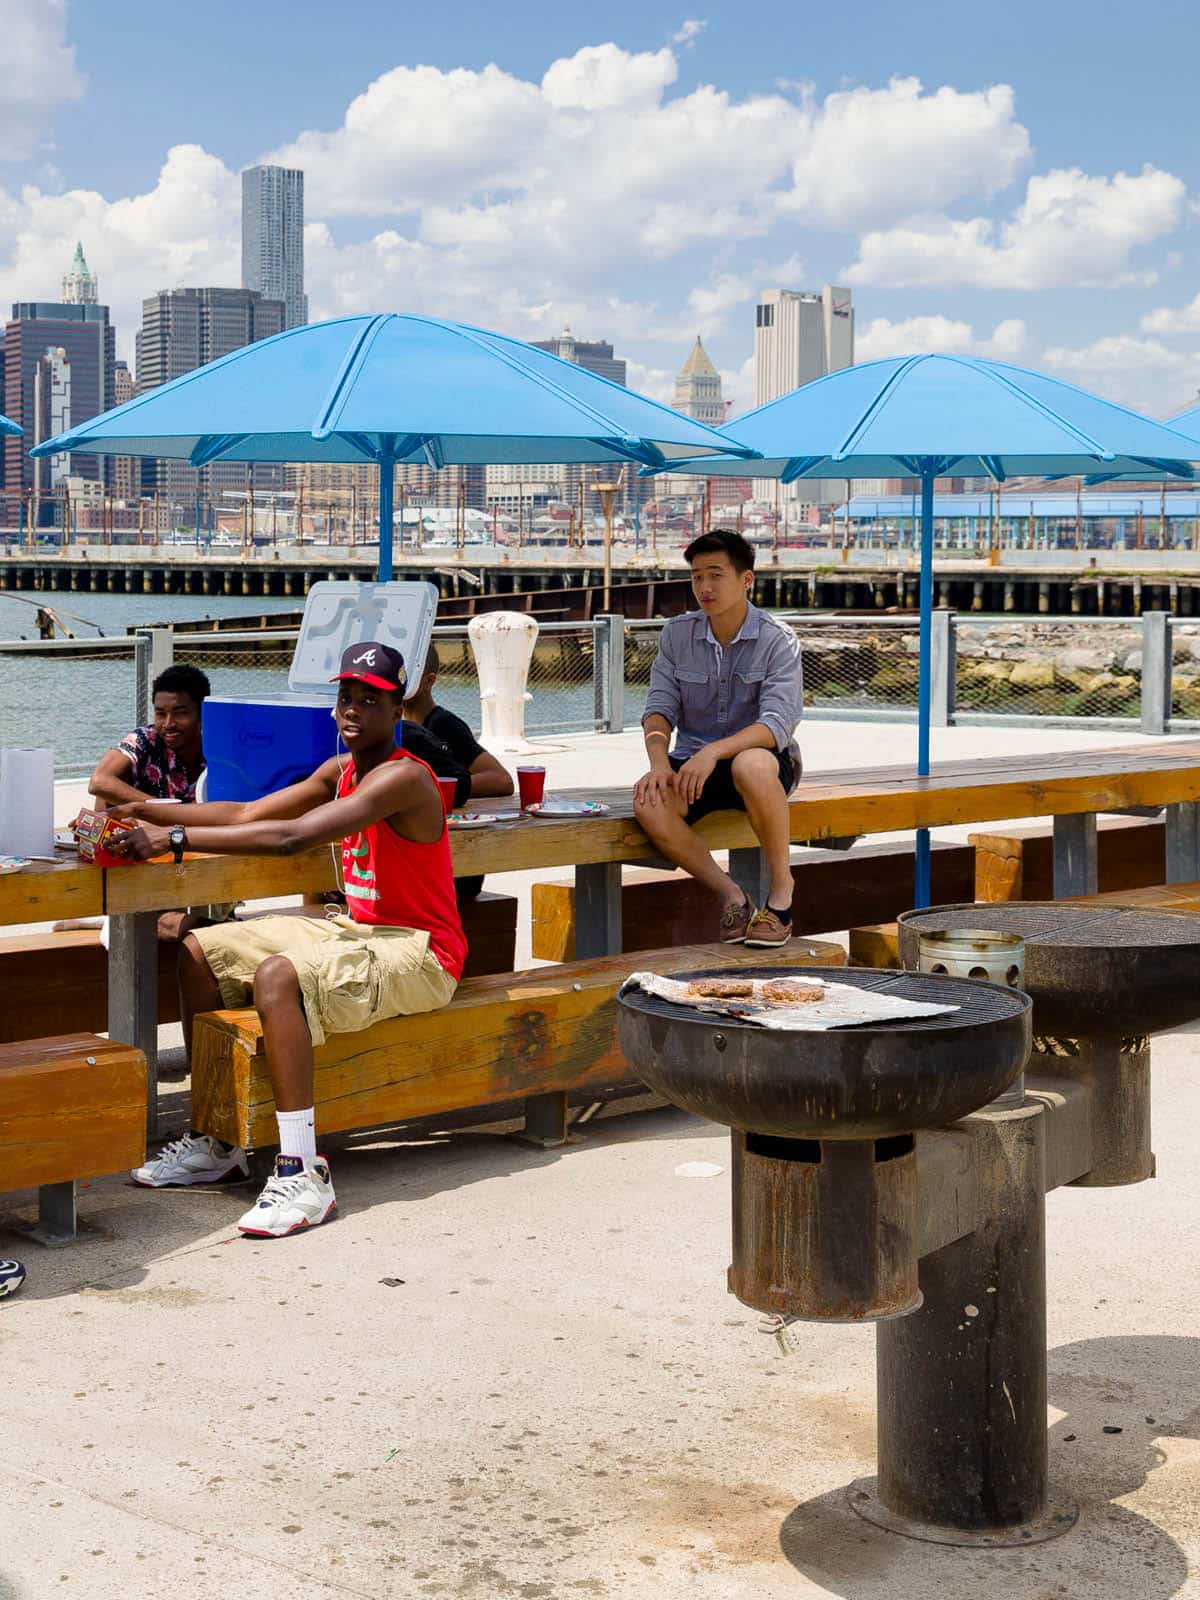 Men sitting at a picnic table with burgers on a grill on a sunny day.